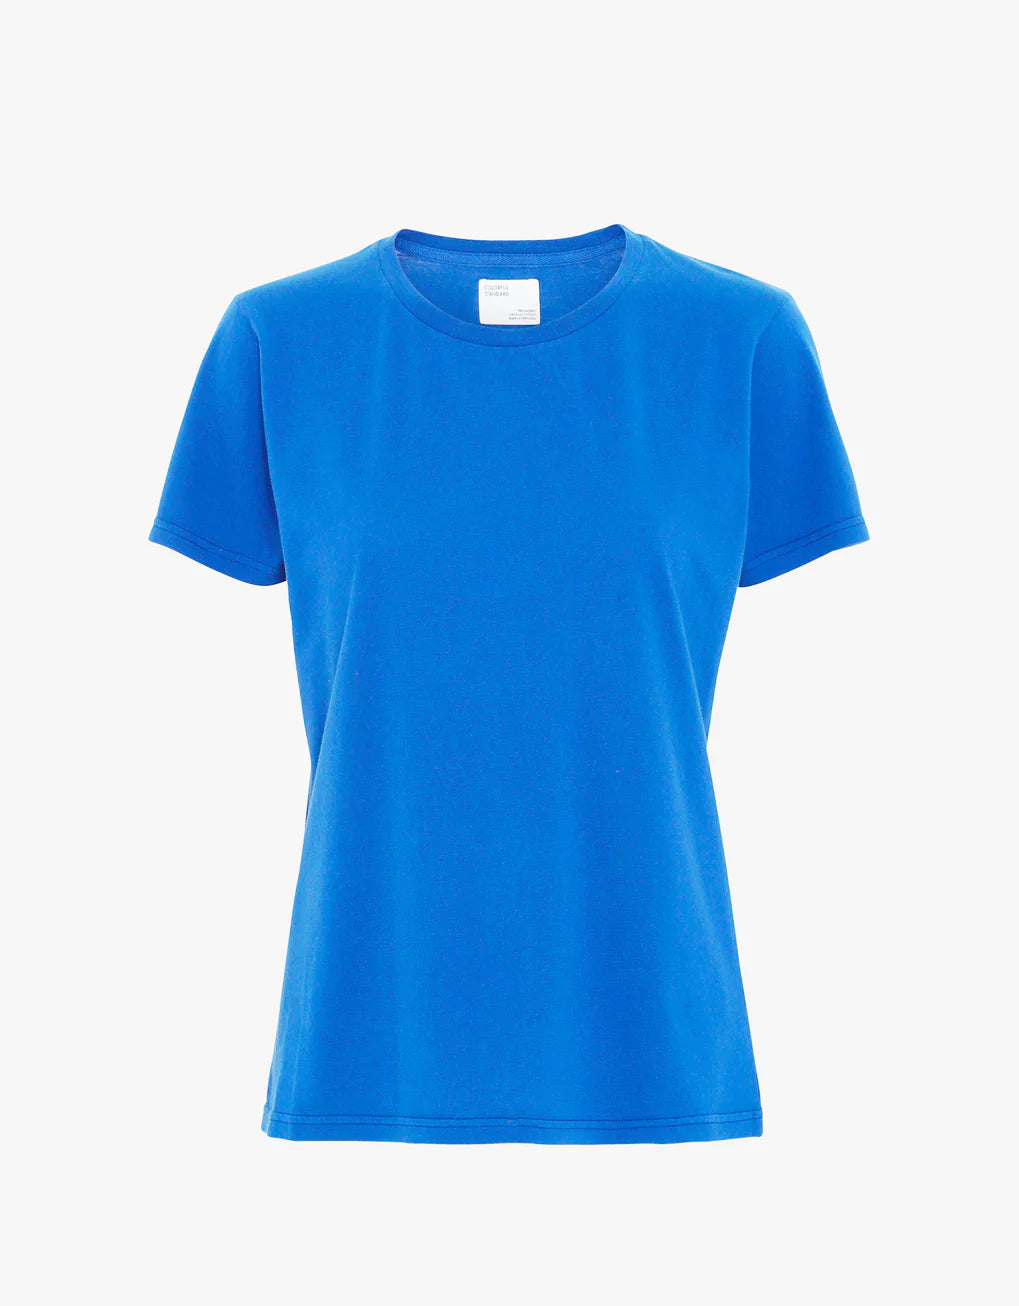 A Colorful Standard Light Organic Tee made from organic cotton.